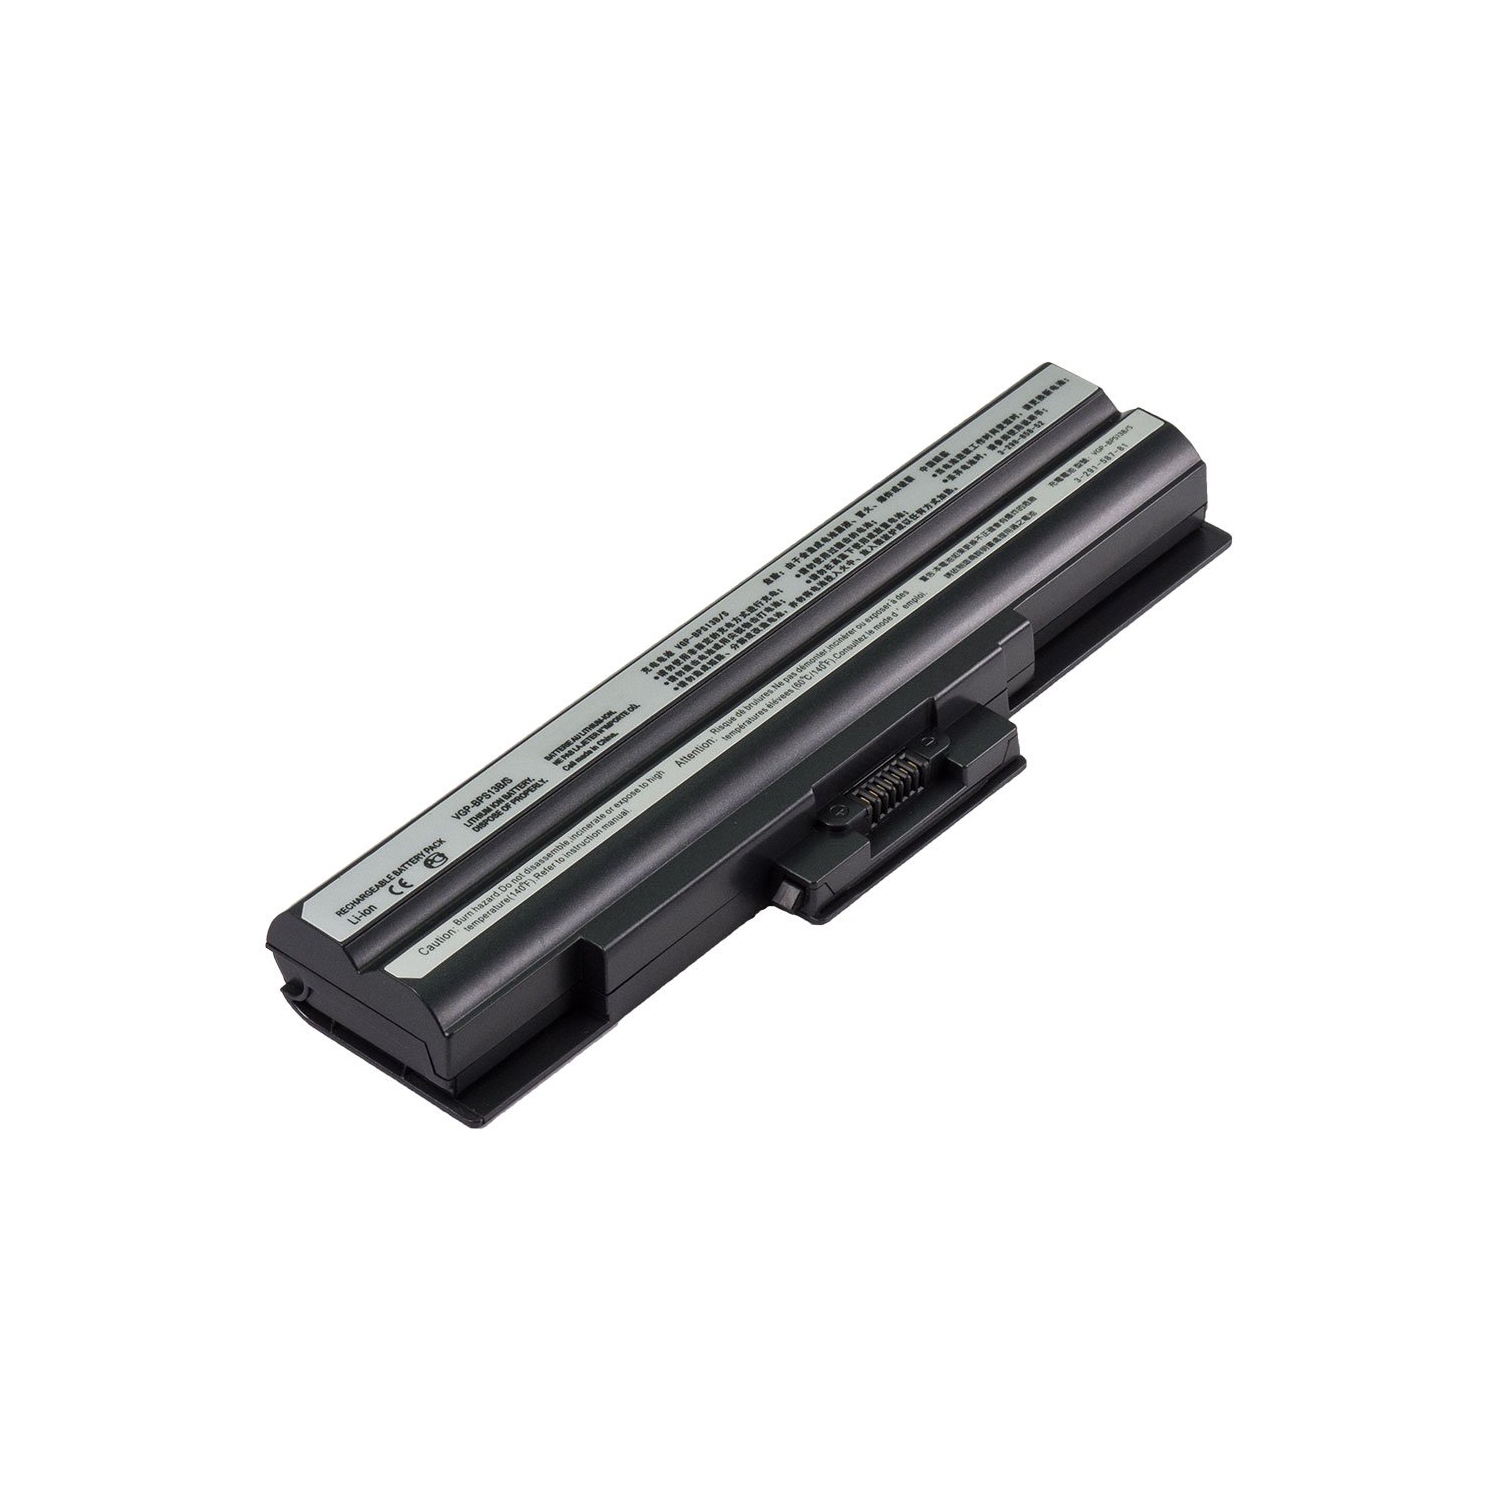 Laptop Battery Replacement for Sony VAIO VGN-SR599GBB, VGP-BPL13, VGP-BPS13/Q, VGP-BPS13A/B, VGP-BPS13A/S, VGP-BPS13A